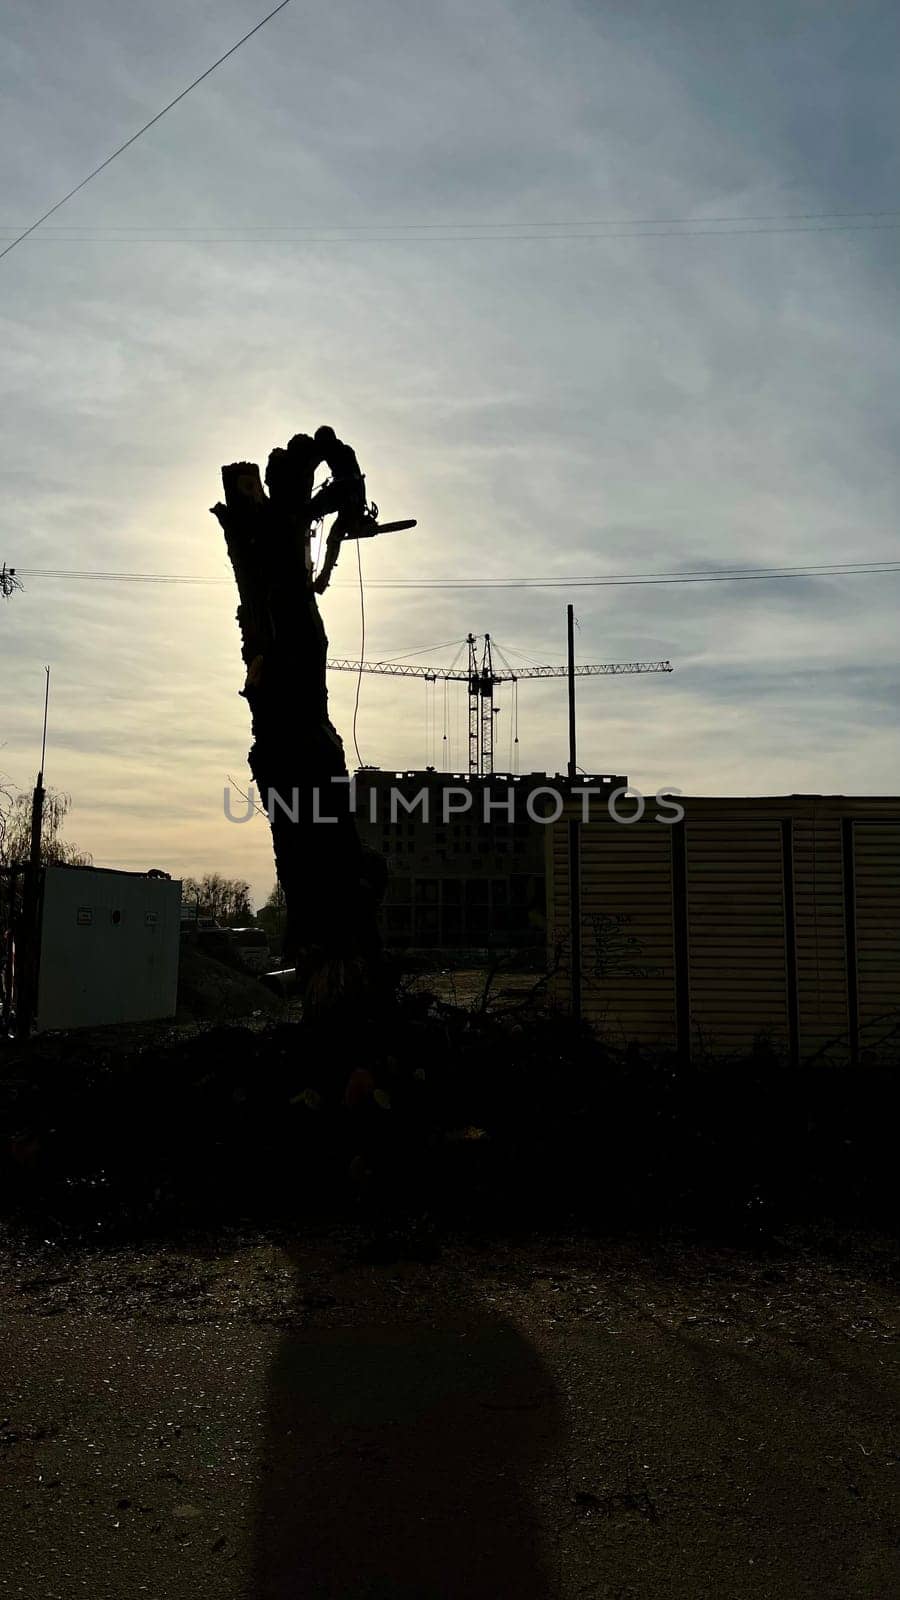 Arborist, man, forester cuts and cuts a tree in the city at sunset on a summer day, changing the natural landscape